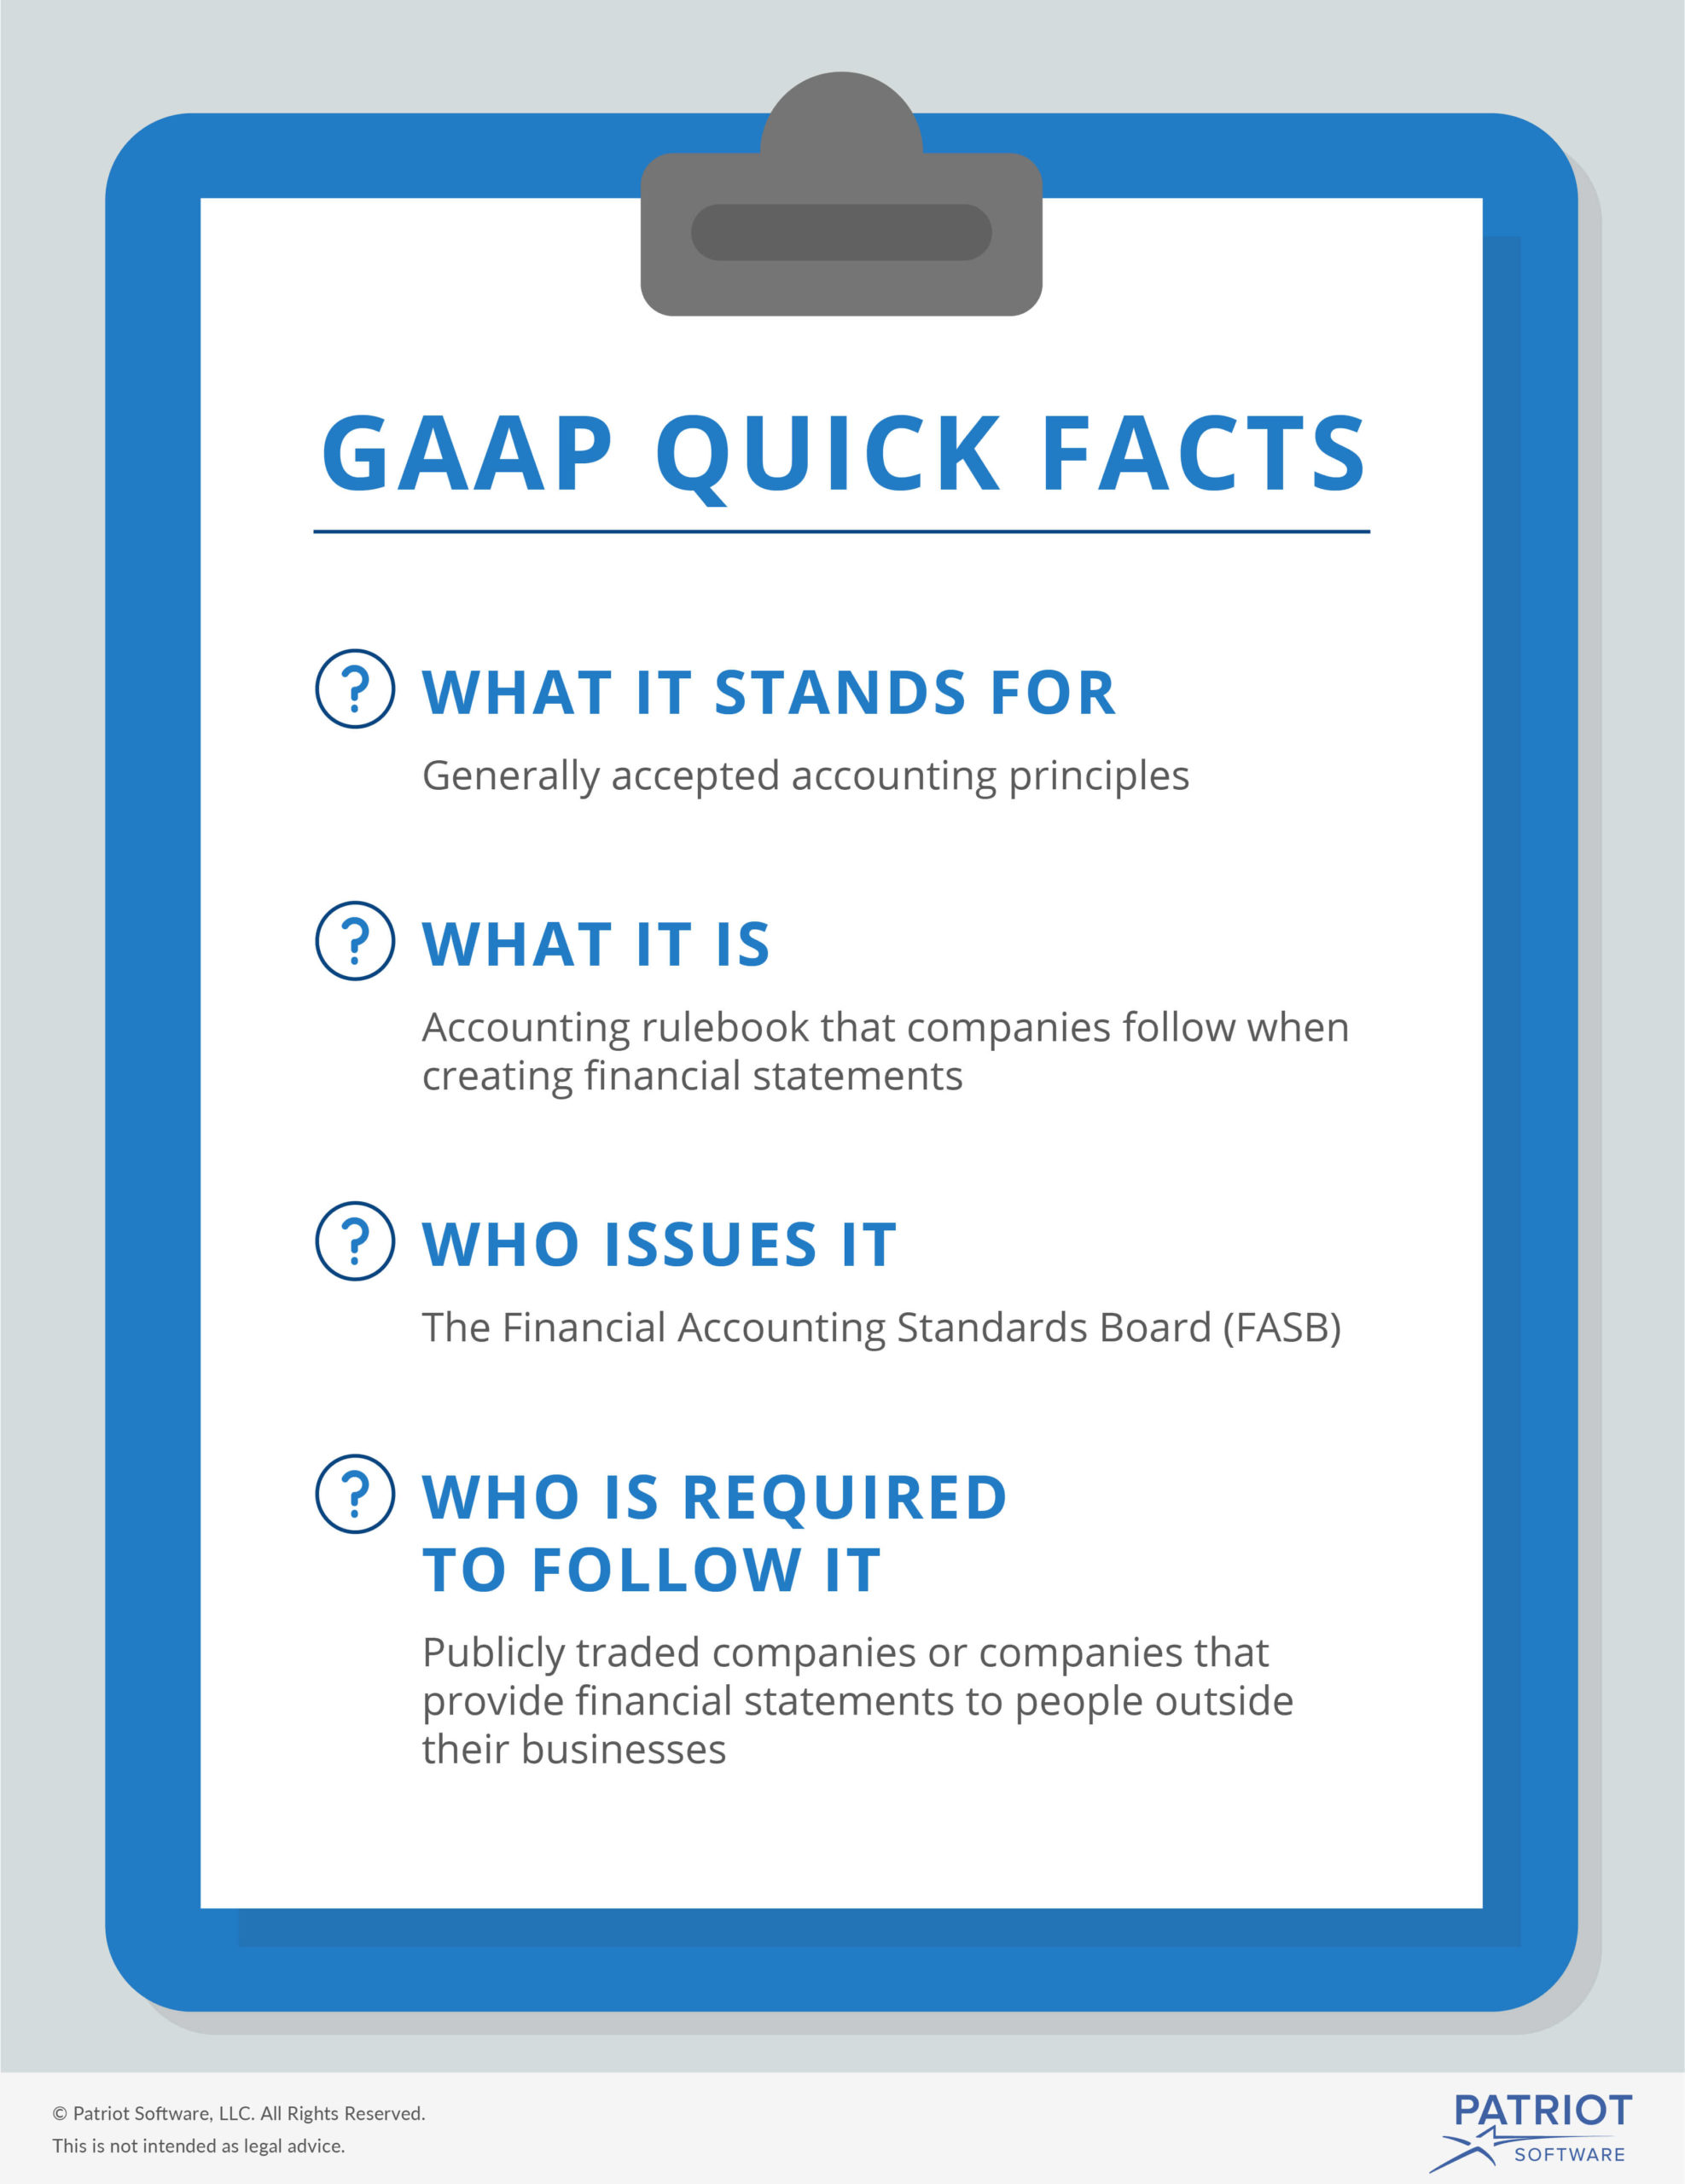 Your Guide To GAAP Generally Accepted Accounting Principles